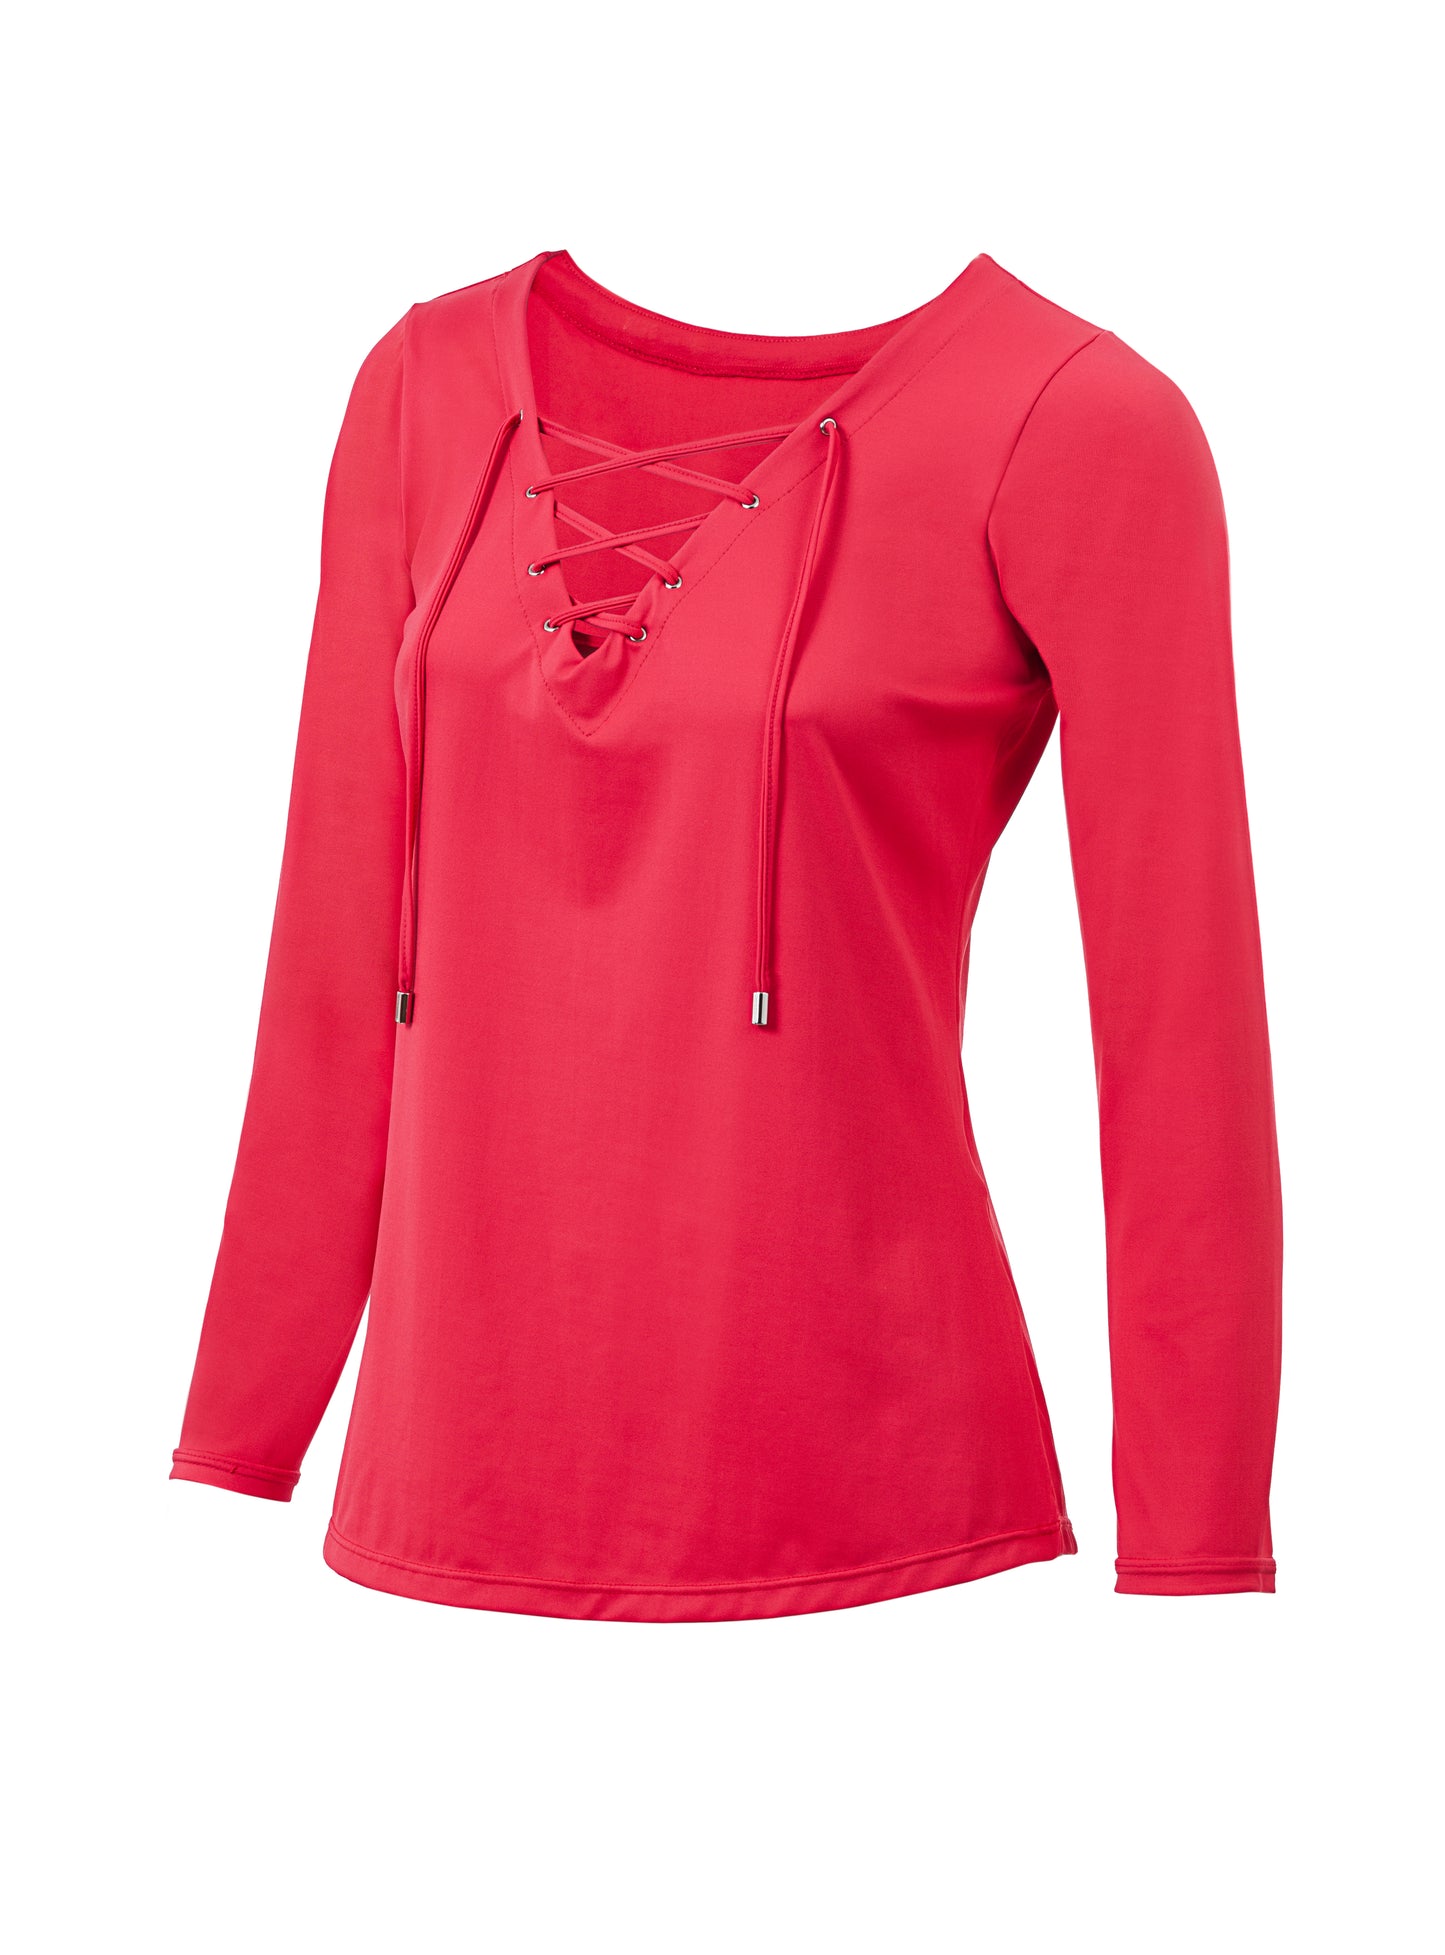 Invel® Therapeutic Lace-Up Top – Women’s Long-Sleeve Classic "Barroco" Blouse with Bioceramic MIG3® Far-Infrared Technology - Invel North America